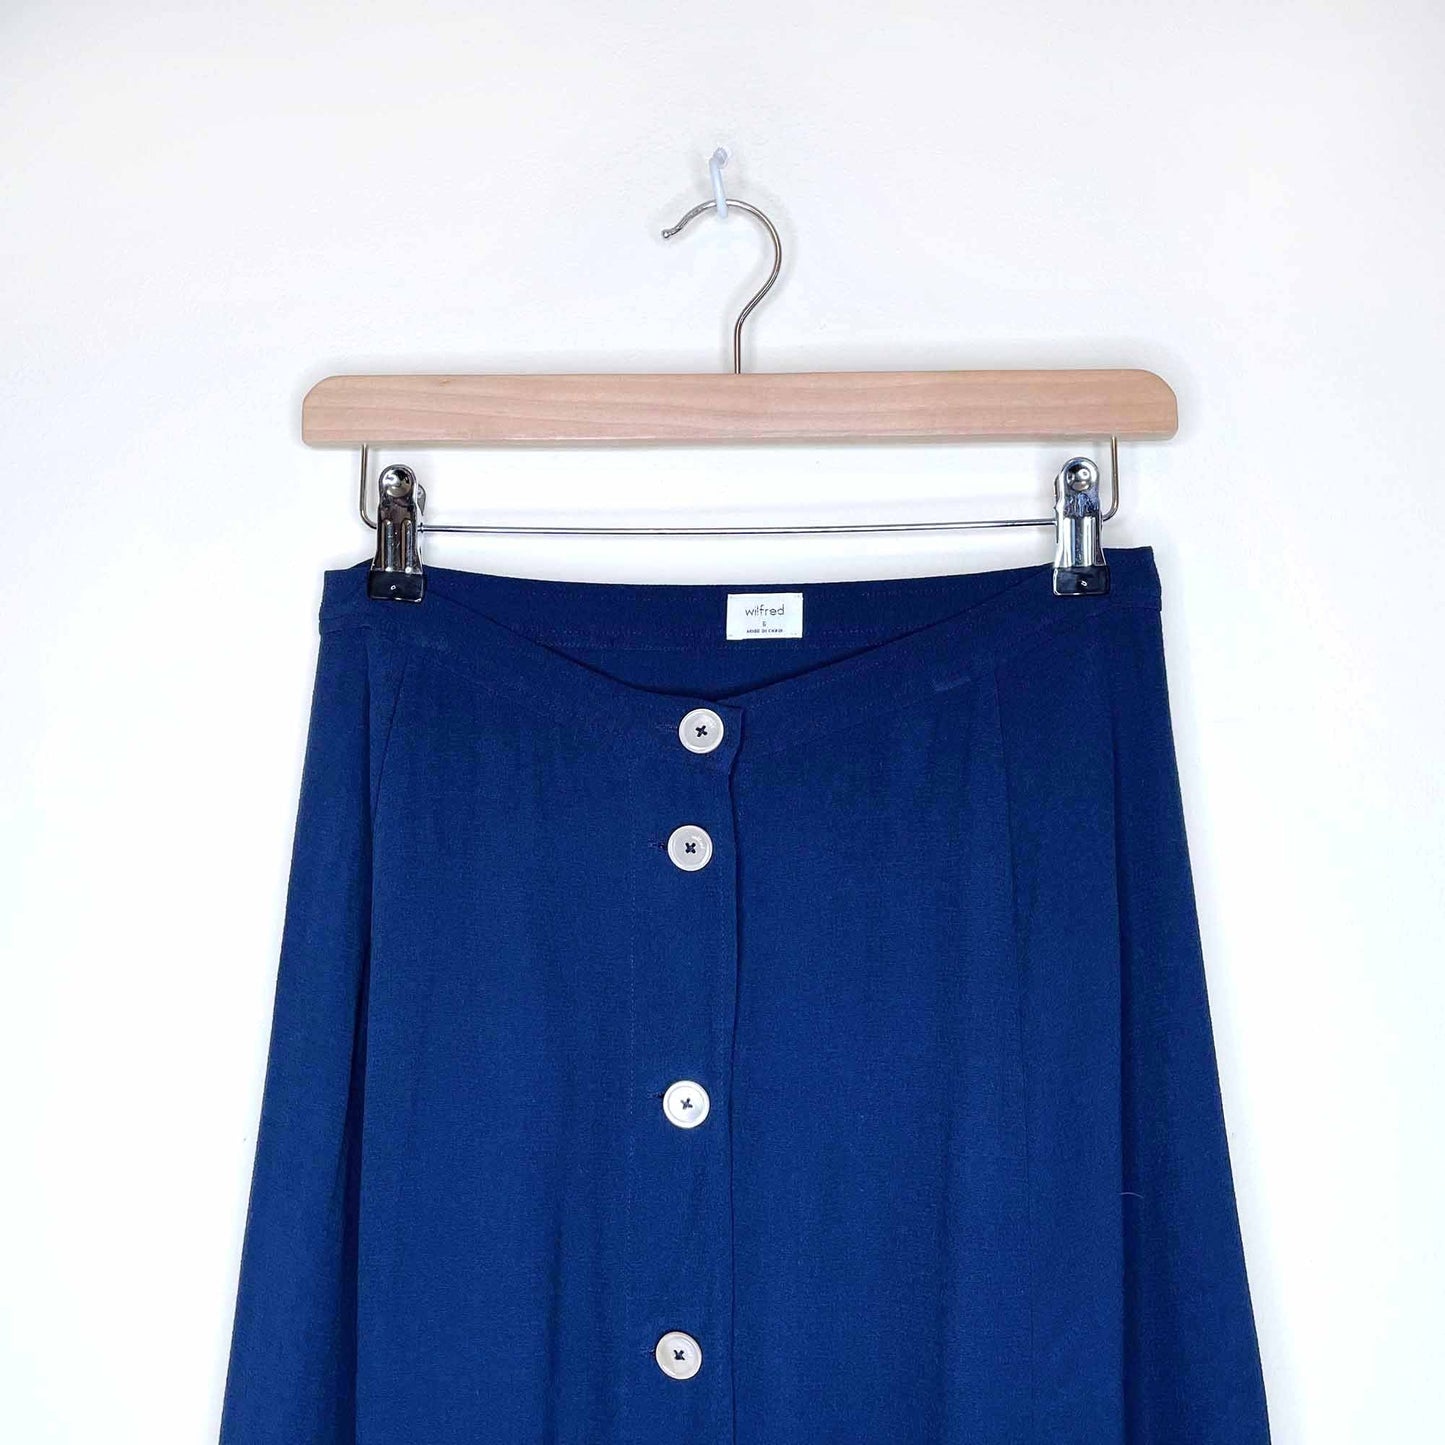 wilfred amelie high rise button front midi skirt - size 6